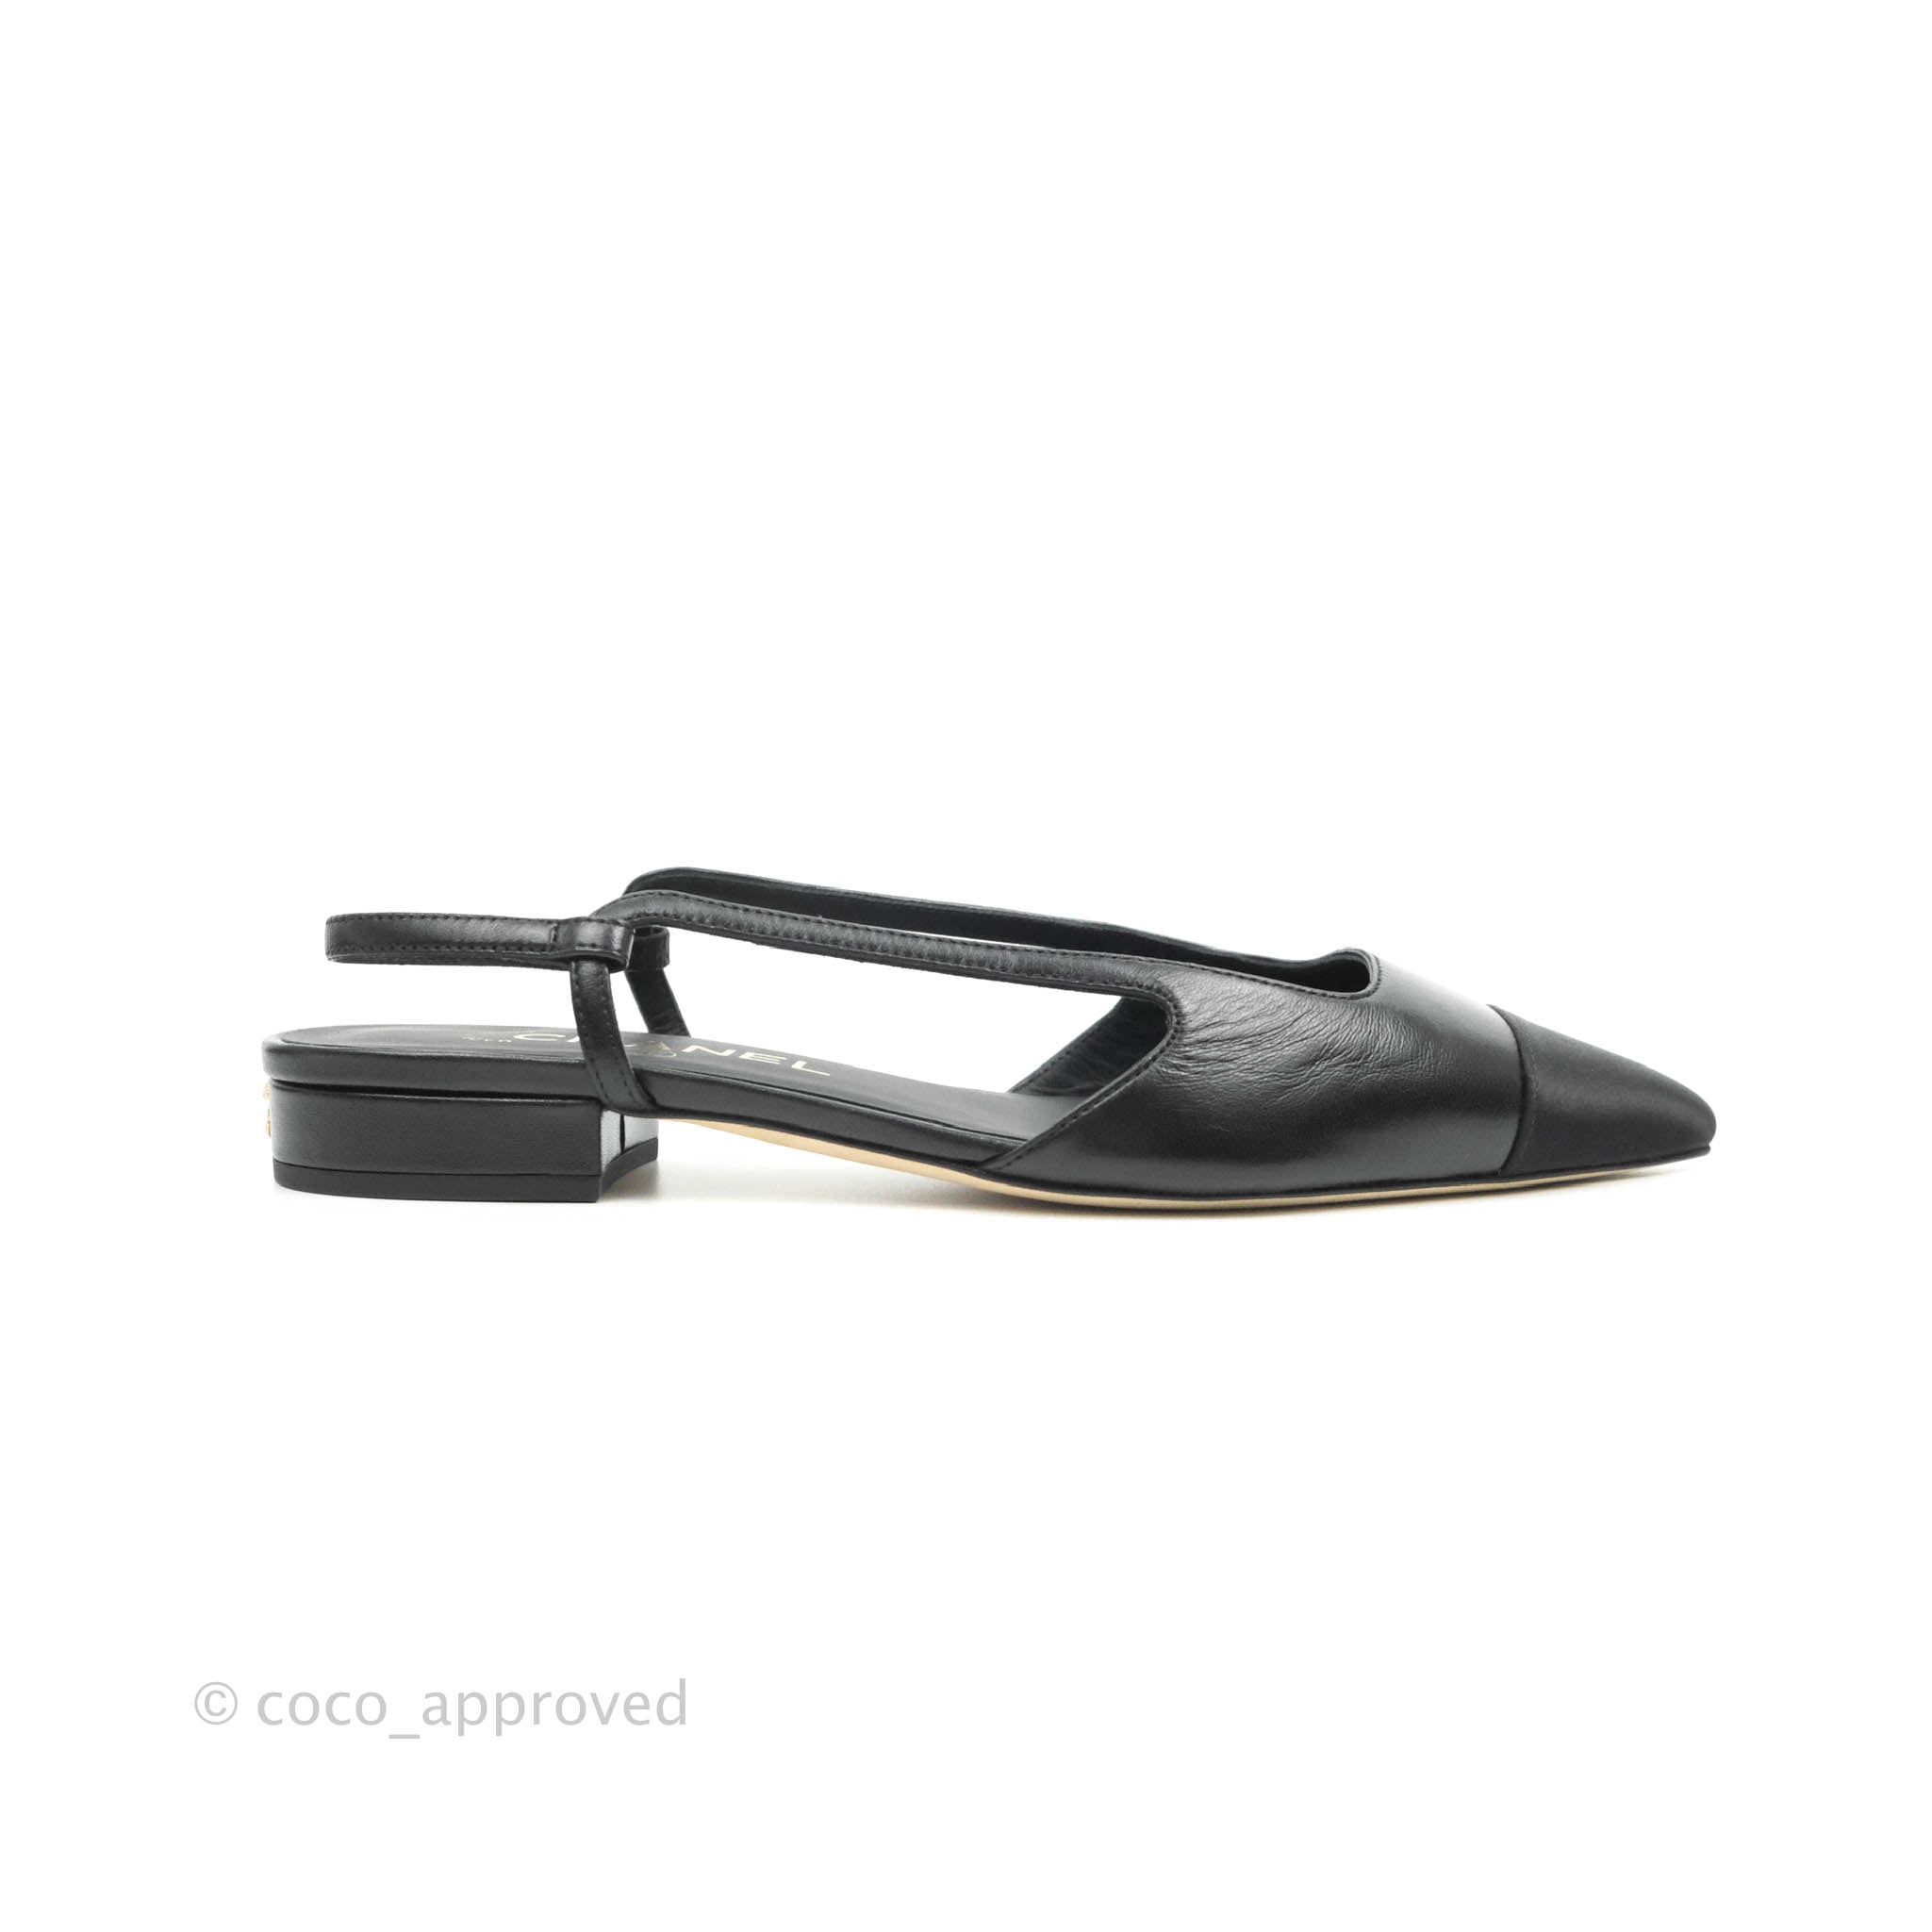 Chanel Slingback Pointed Black Flats Size 36.5 – Coco Approved Studio